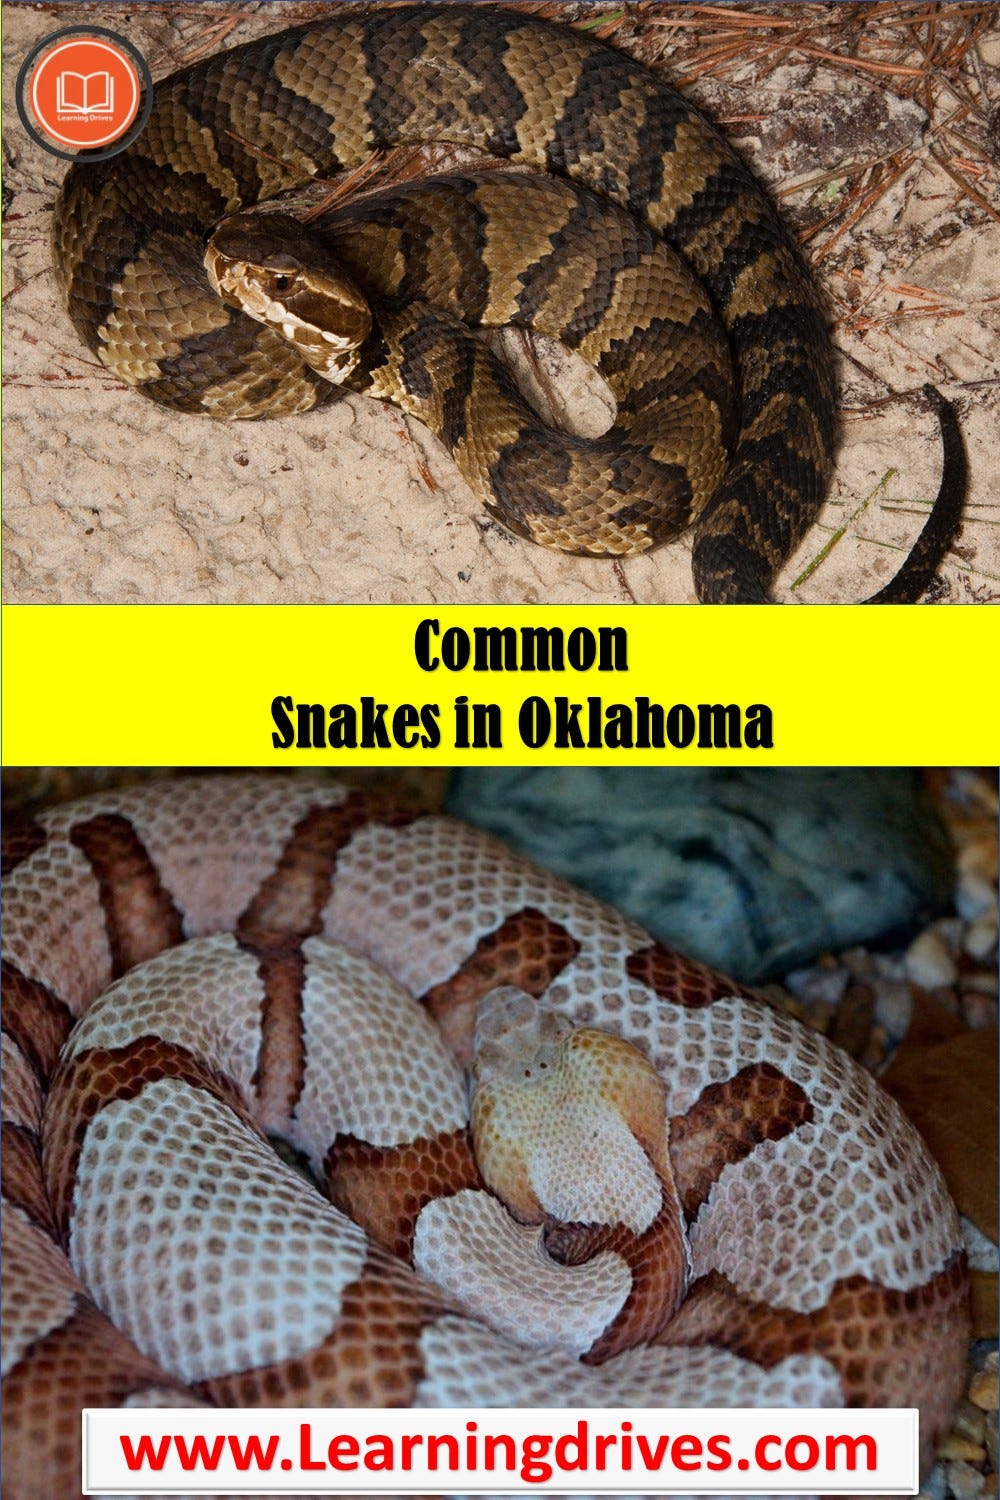 FWC Fish and Wildlife Research Institute - Hognose snakes will